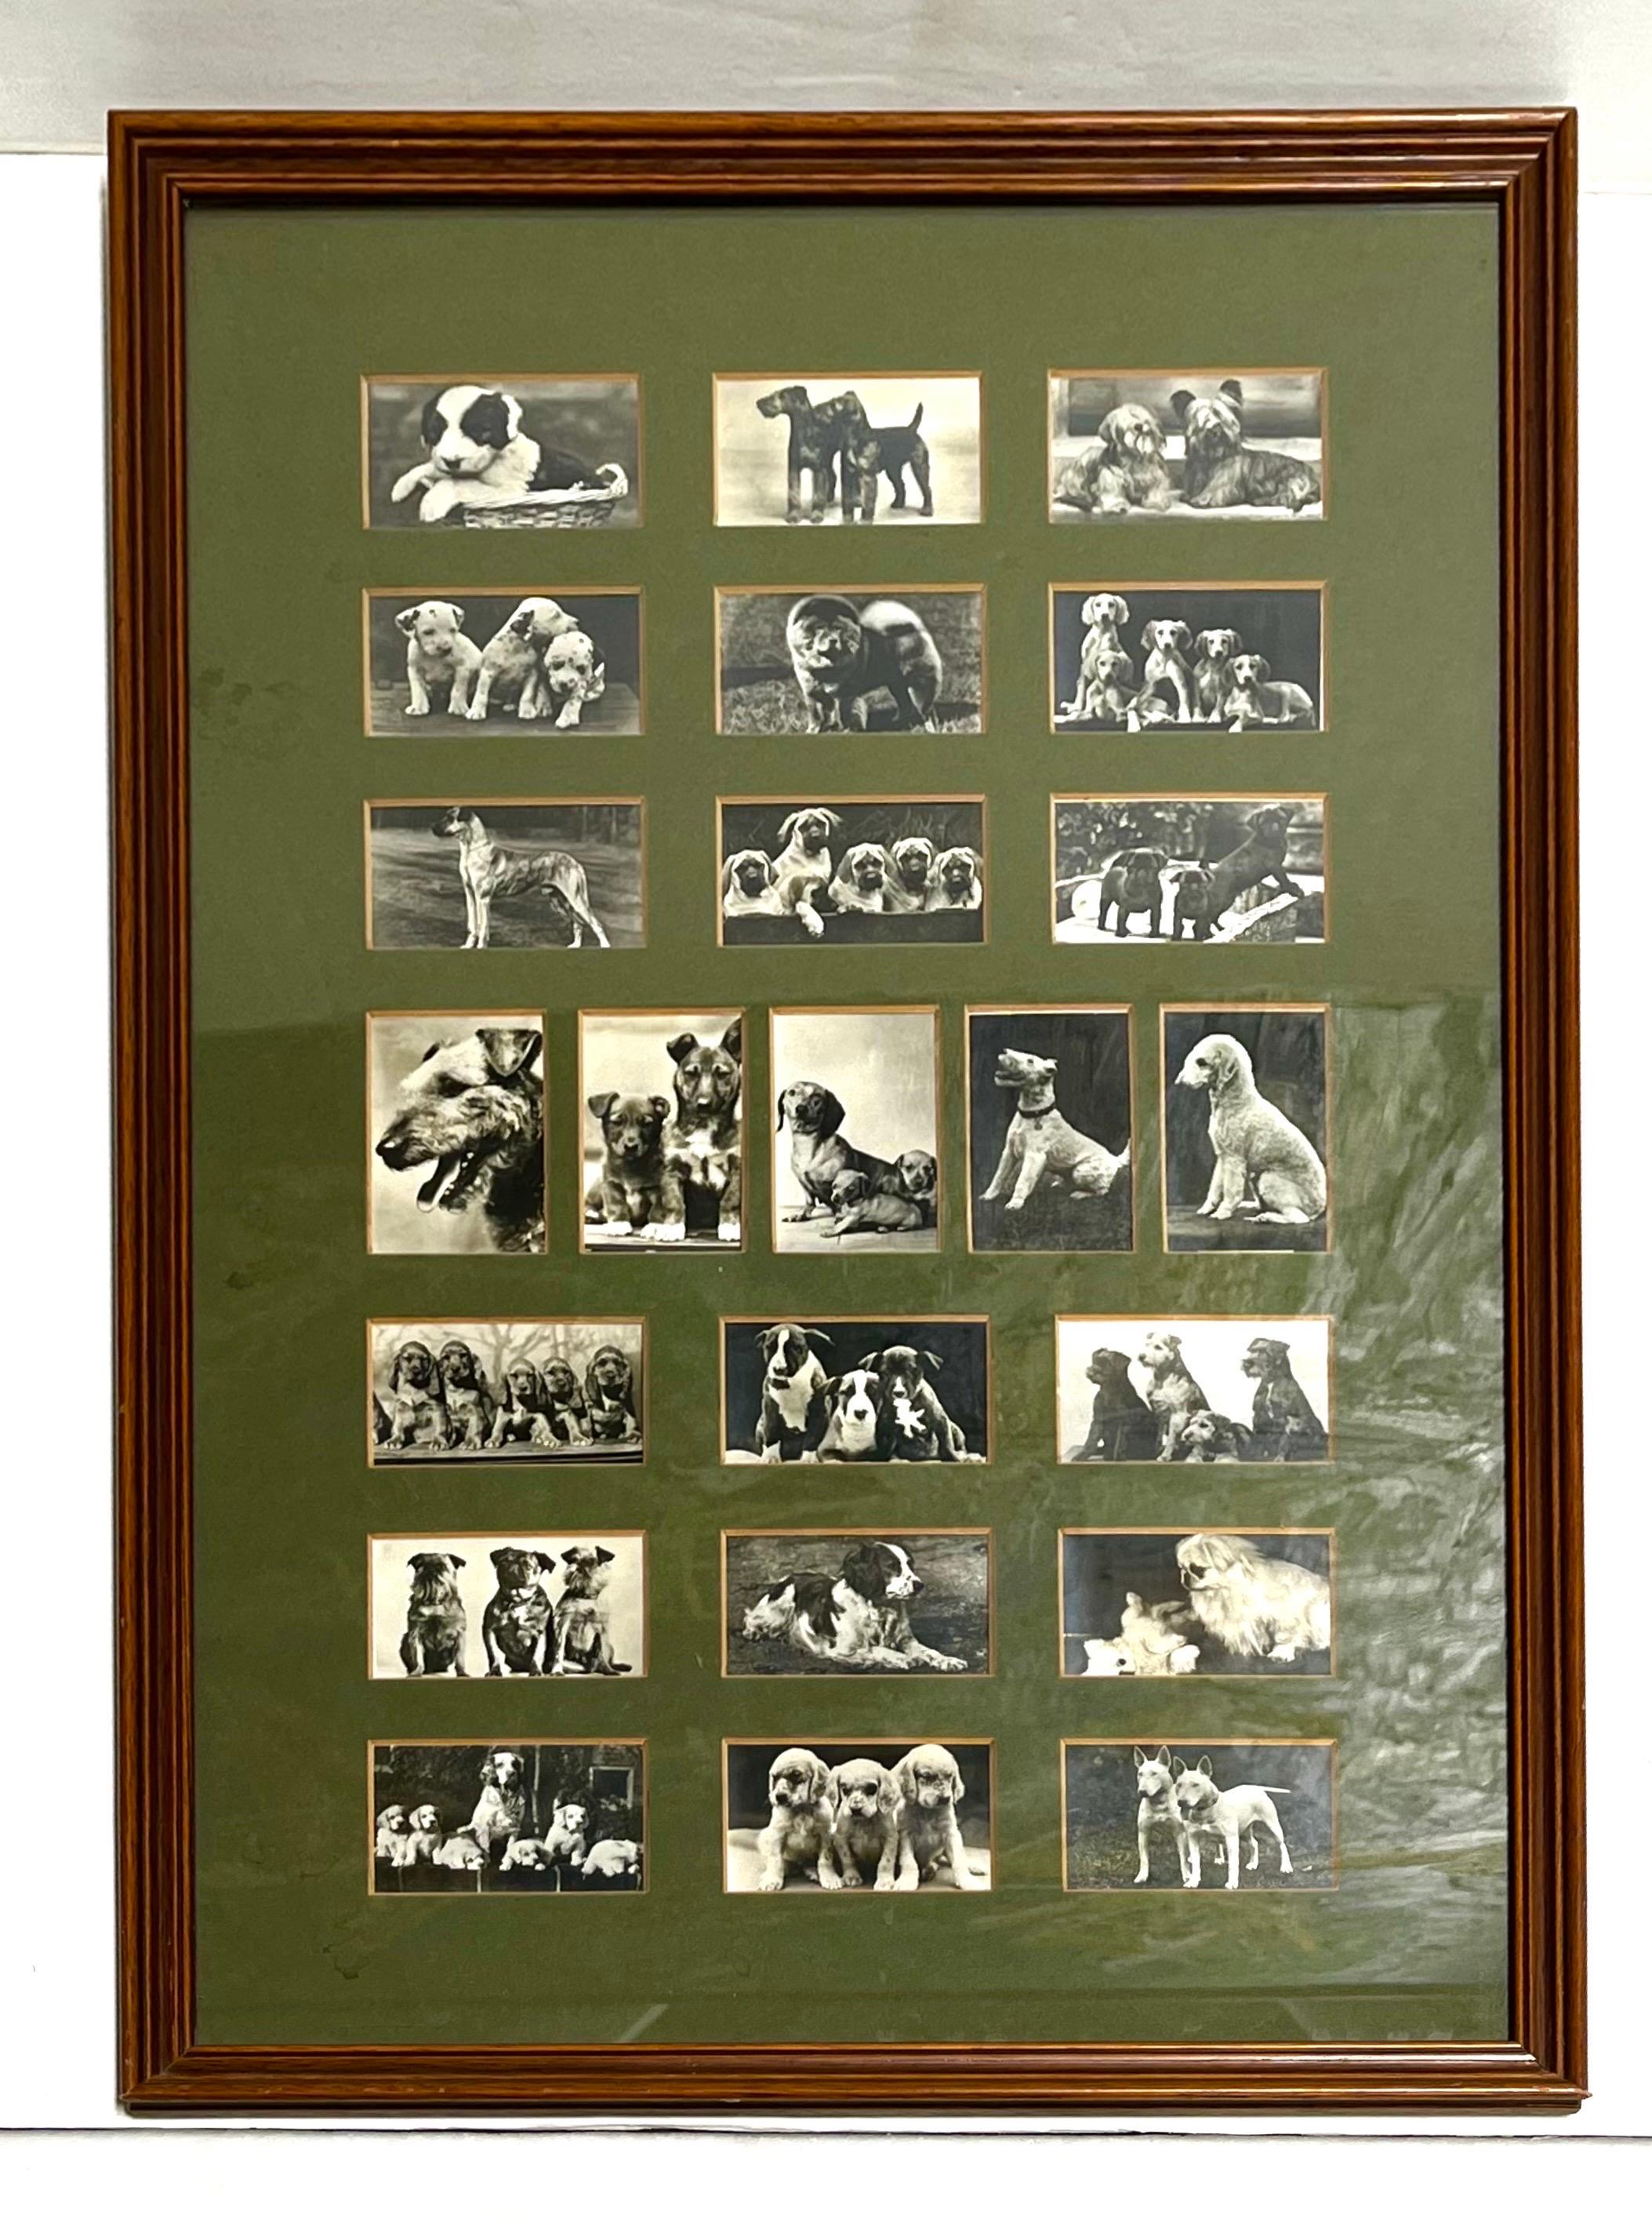 A collection of twenty three vintage black and white photographic images of various dogs, framed and matted. Each photographic image measures approximately 2.75” by 1.75”. The various breeds of dogs are all presented in totally adorable